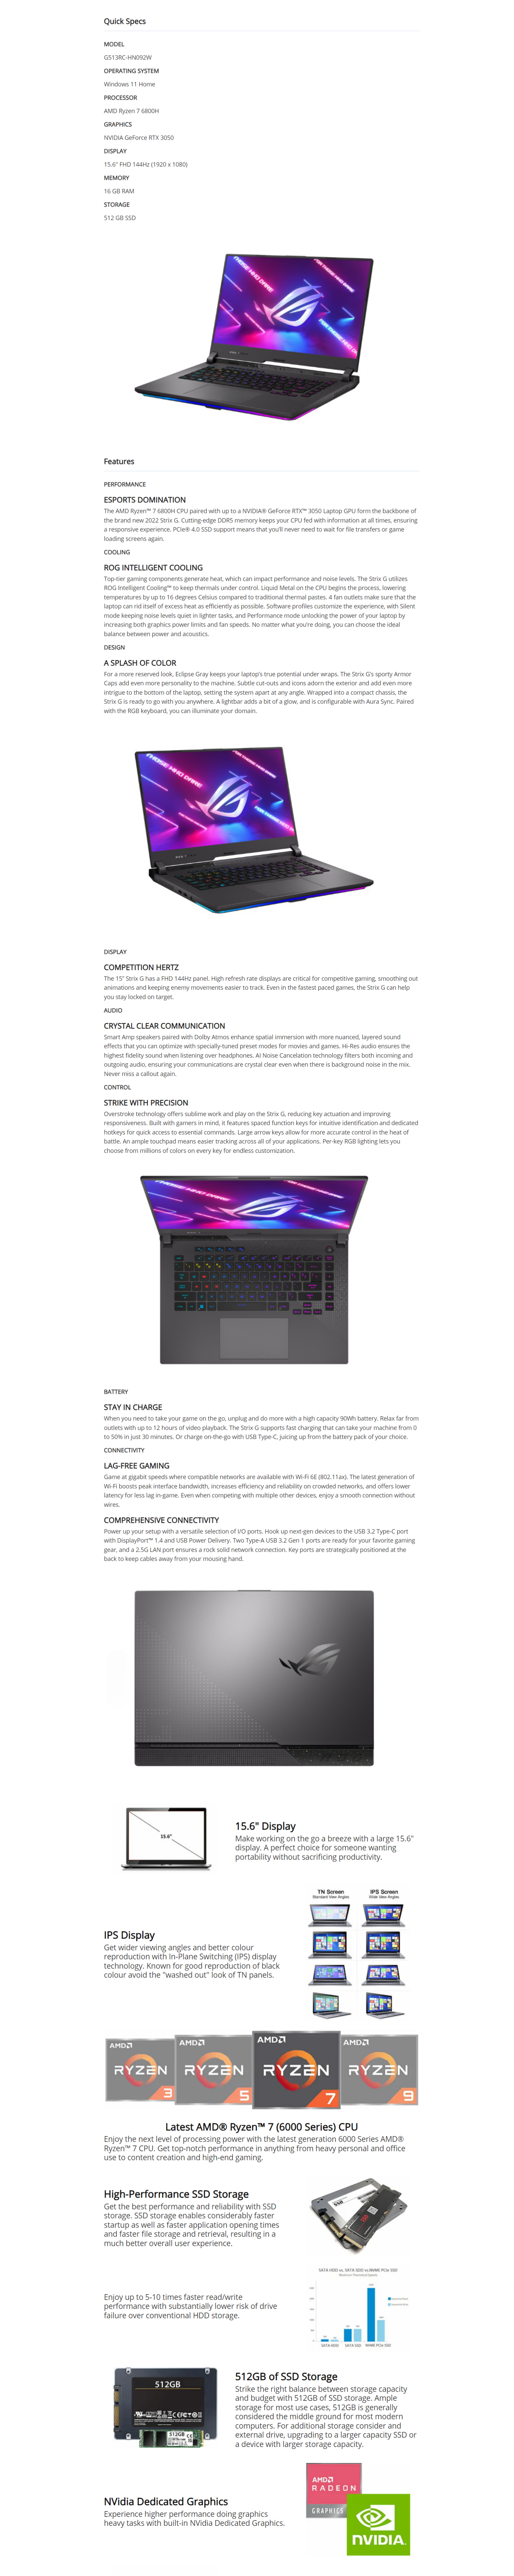 A large marketing image providing additional information about the product ASUS ROG Strix G15 (G513) - 15.6" 144Hz, Ryzen 7, RTX 3050, 16GB/512GB Win 11 Gaming Notebook - Additional alt info not provided